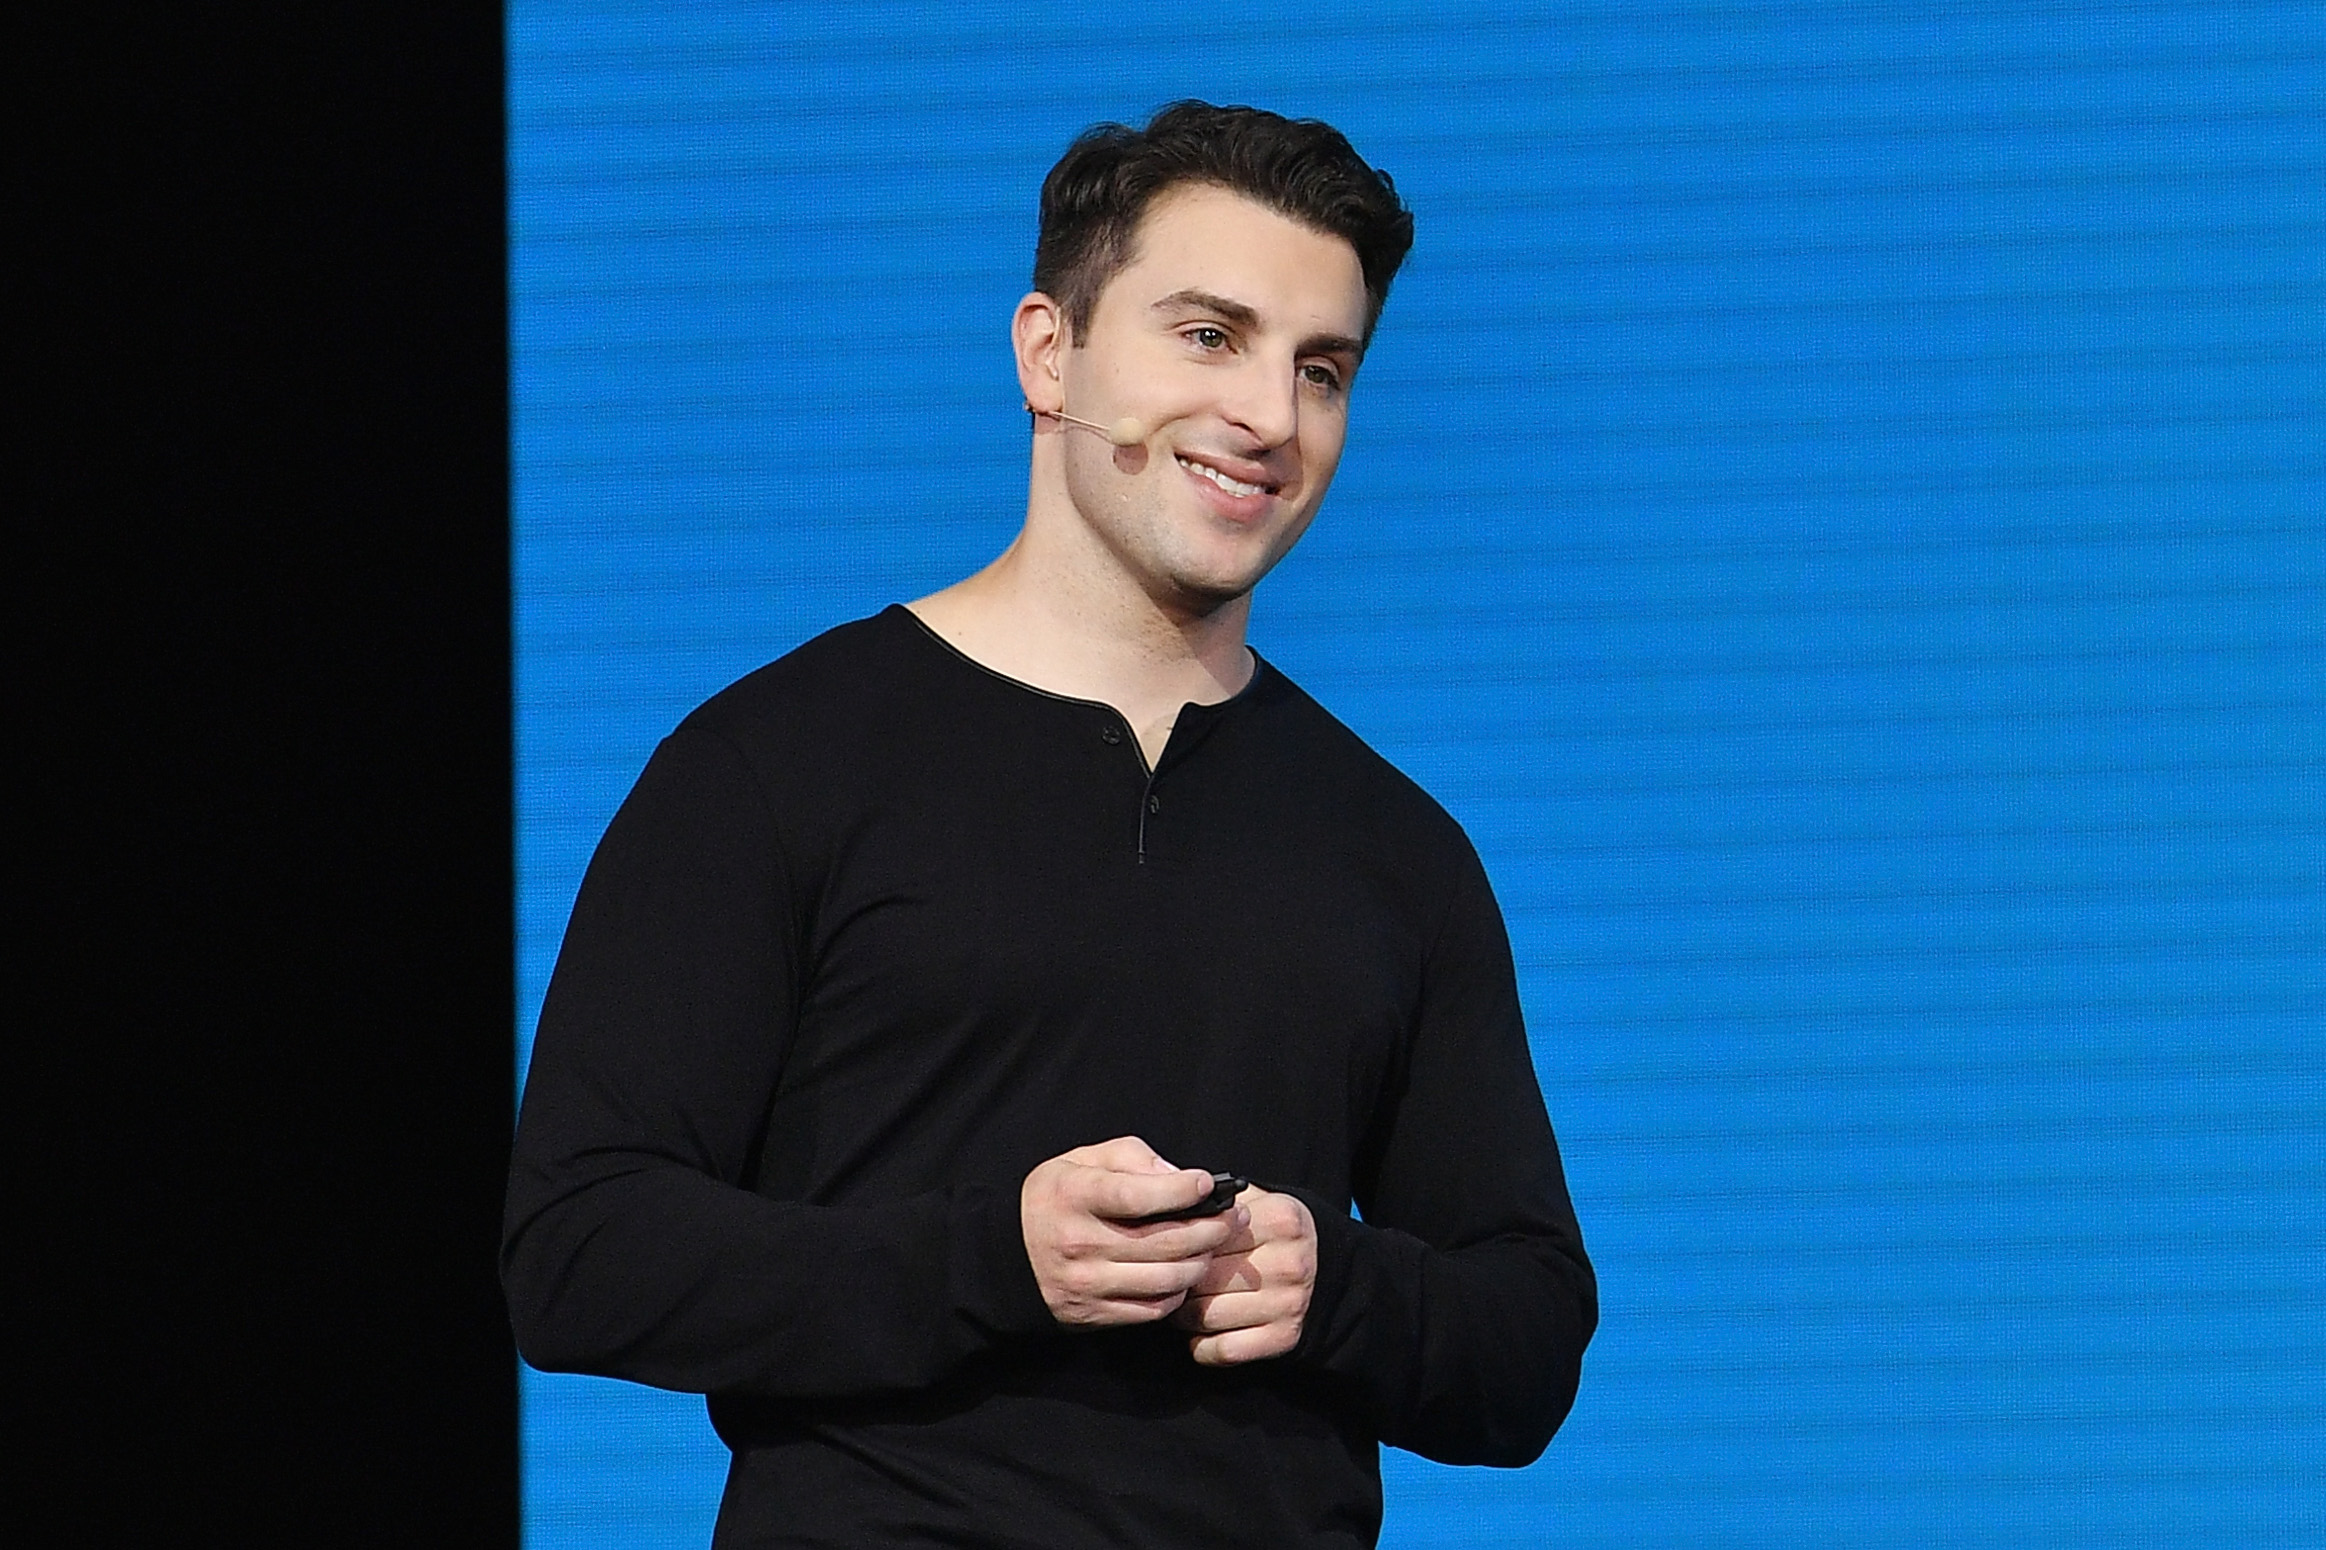 Want to Live With Airbnb’s CEO? Brian Chesky Lists SF Guest Room for Rent